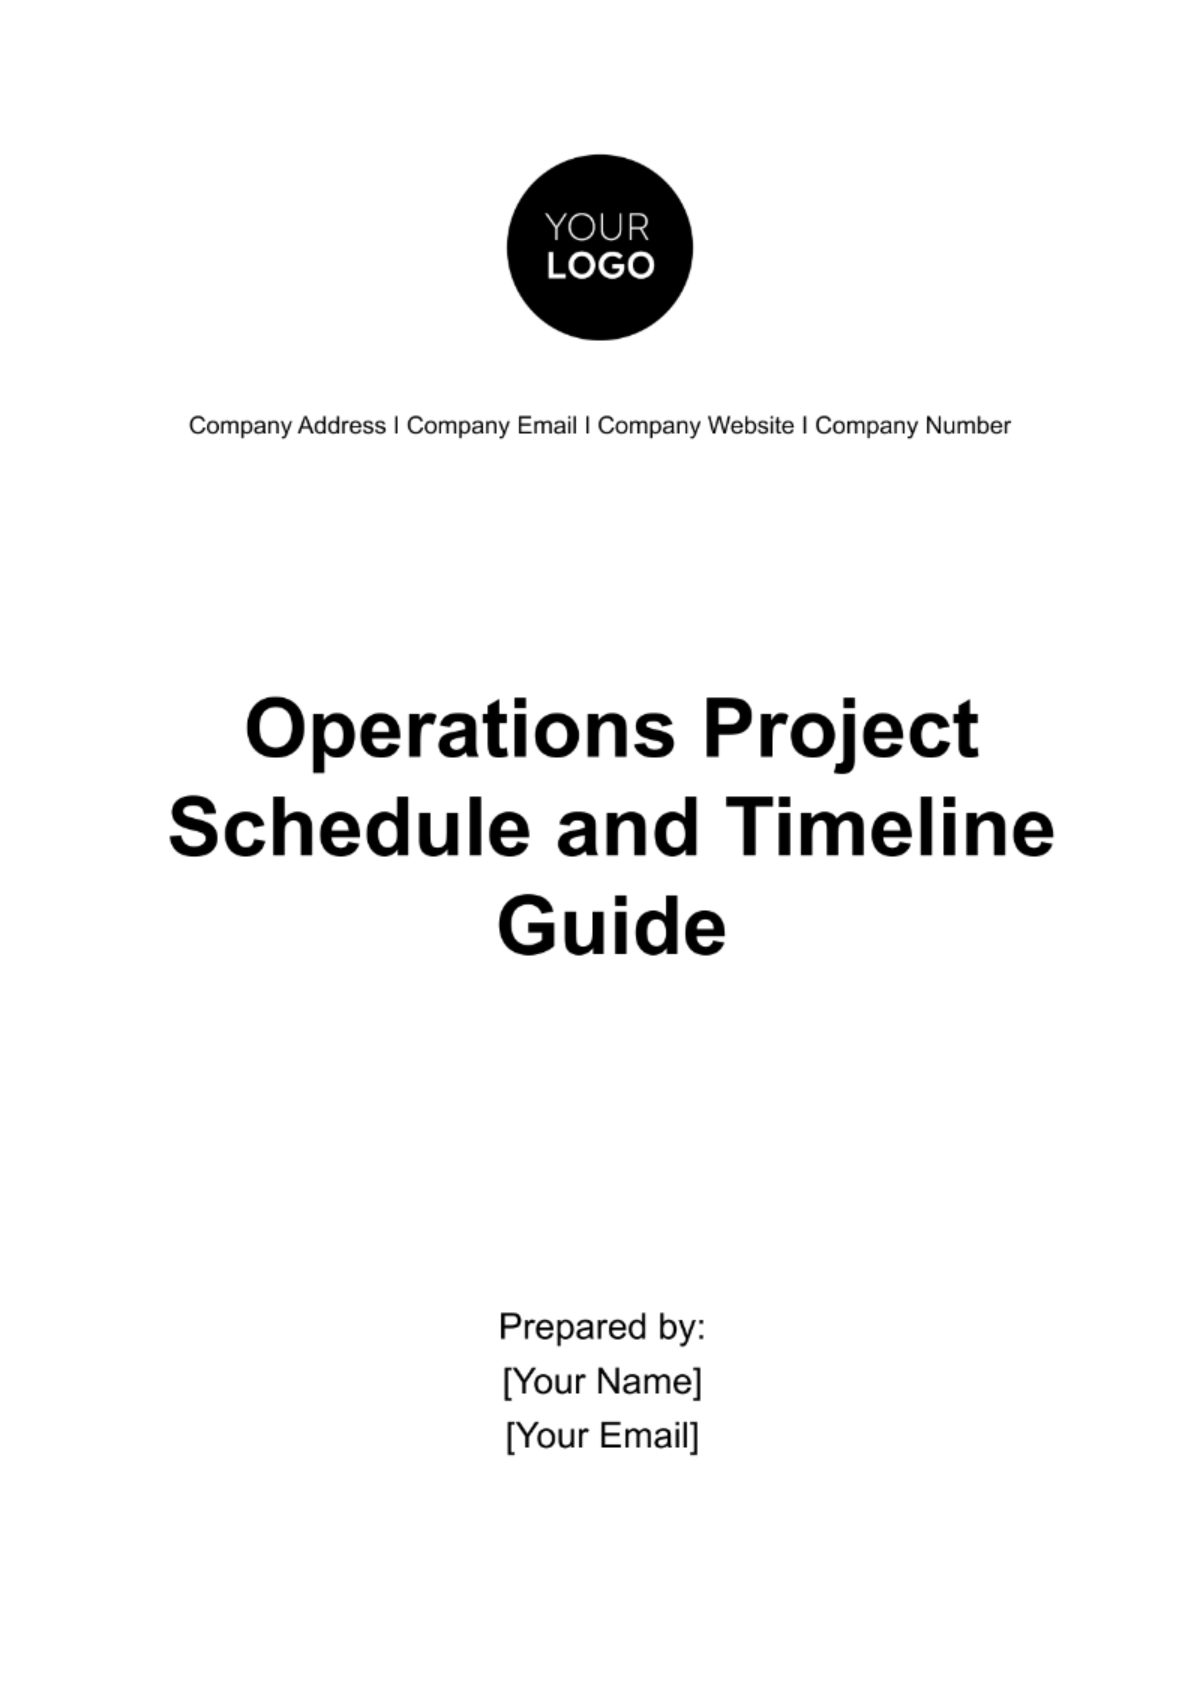 Operations Project Schedule and Timeline Guide Template